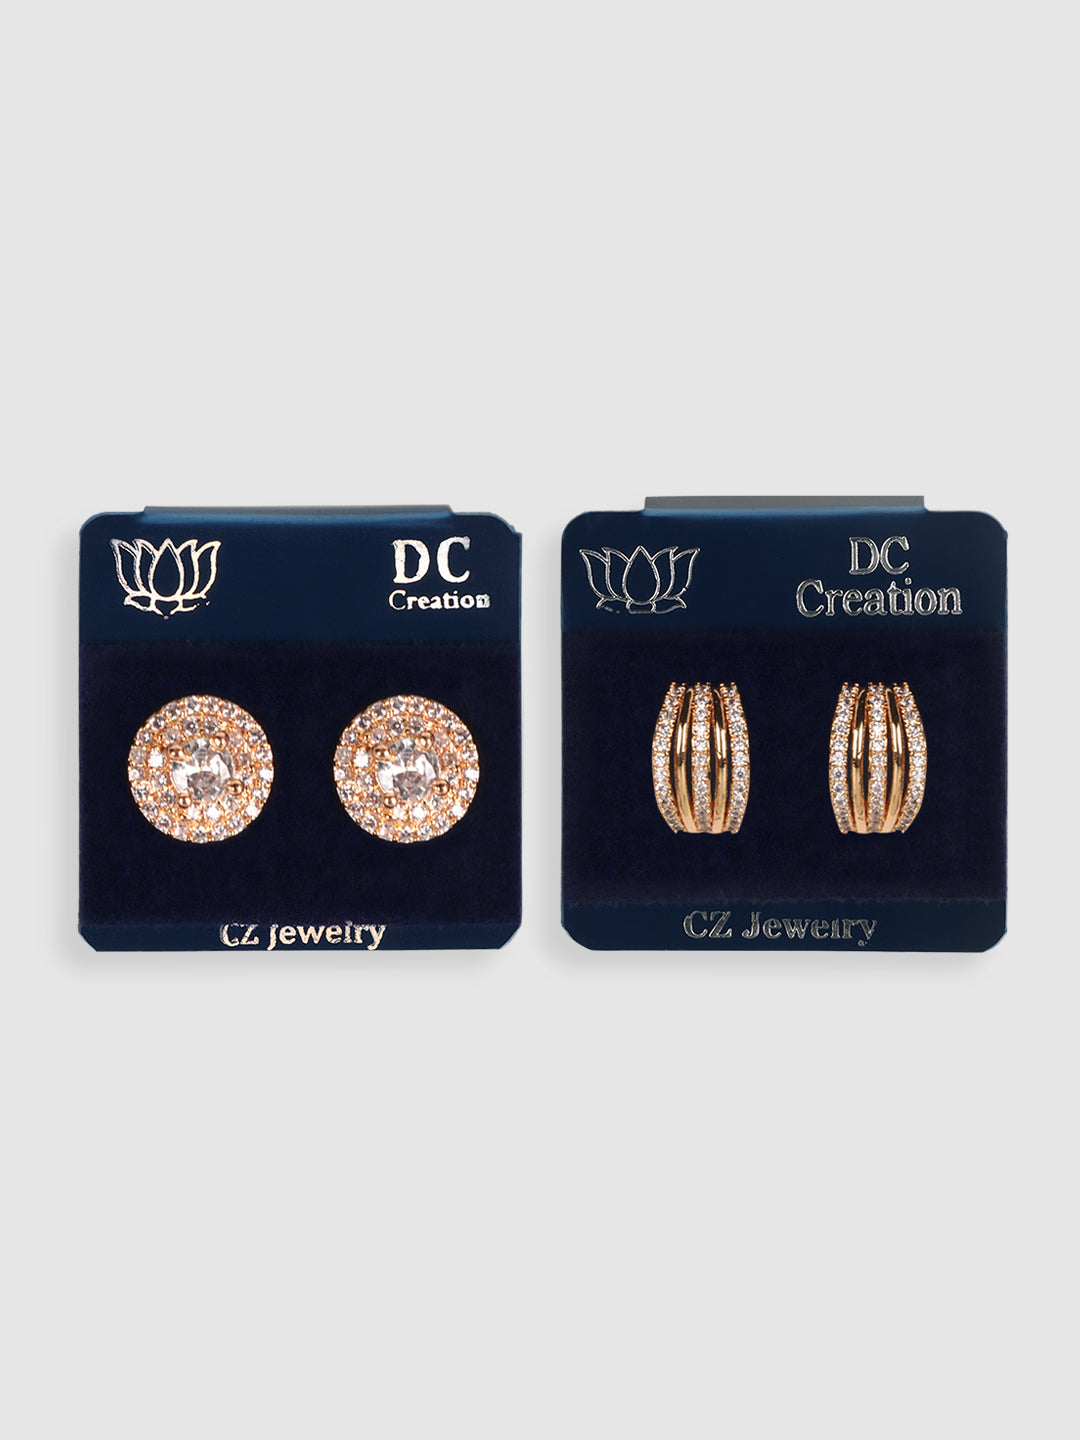 Gold-Toned Contemporary Pack Of 2 Studs Earrings